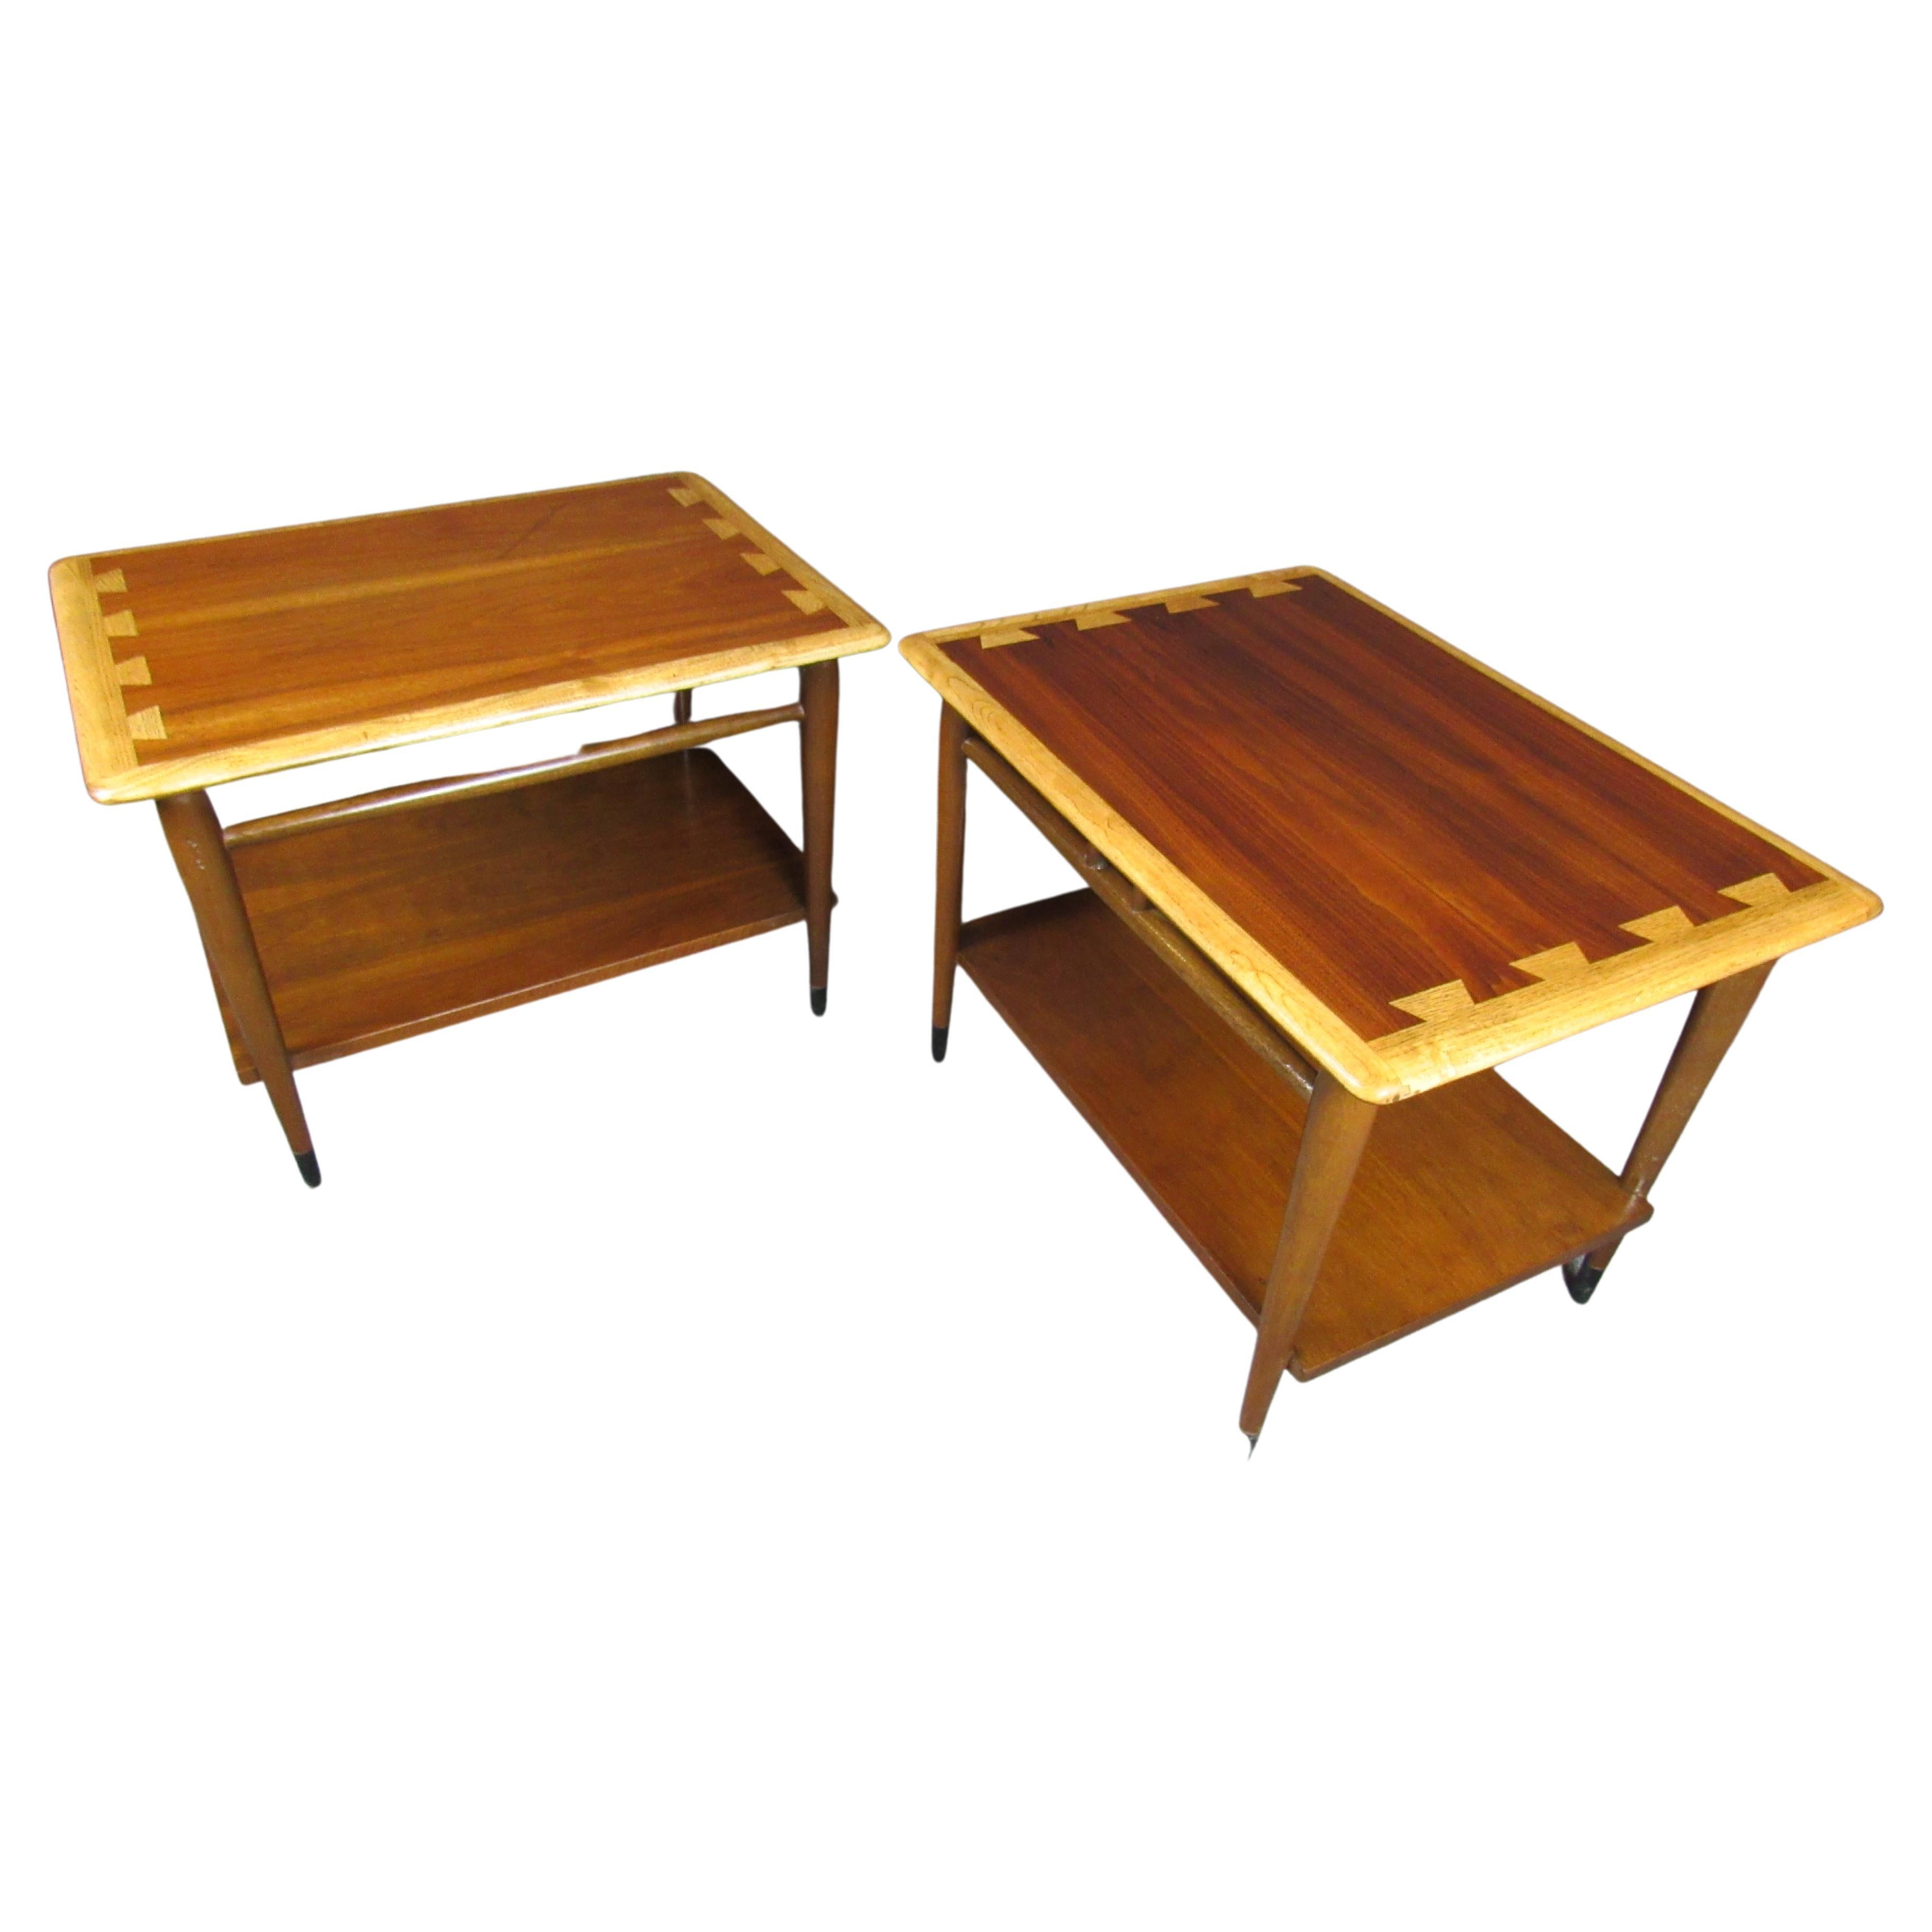 Pair of Mid-Century Modern Side Tables by Lane